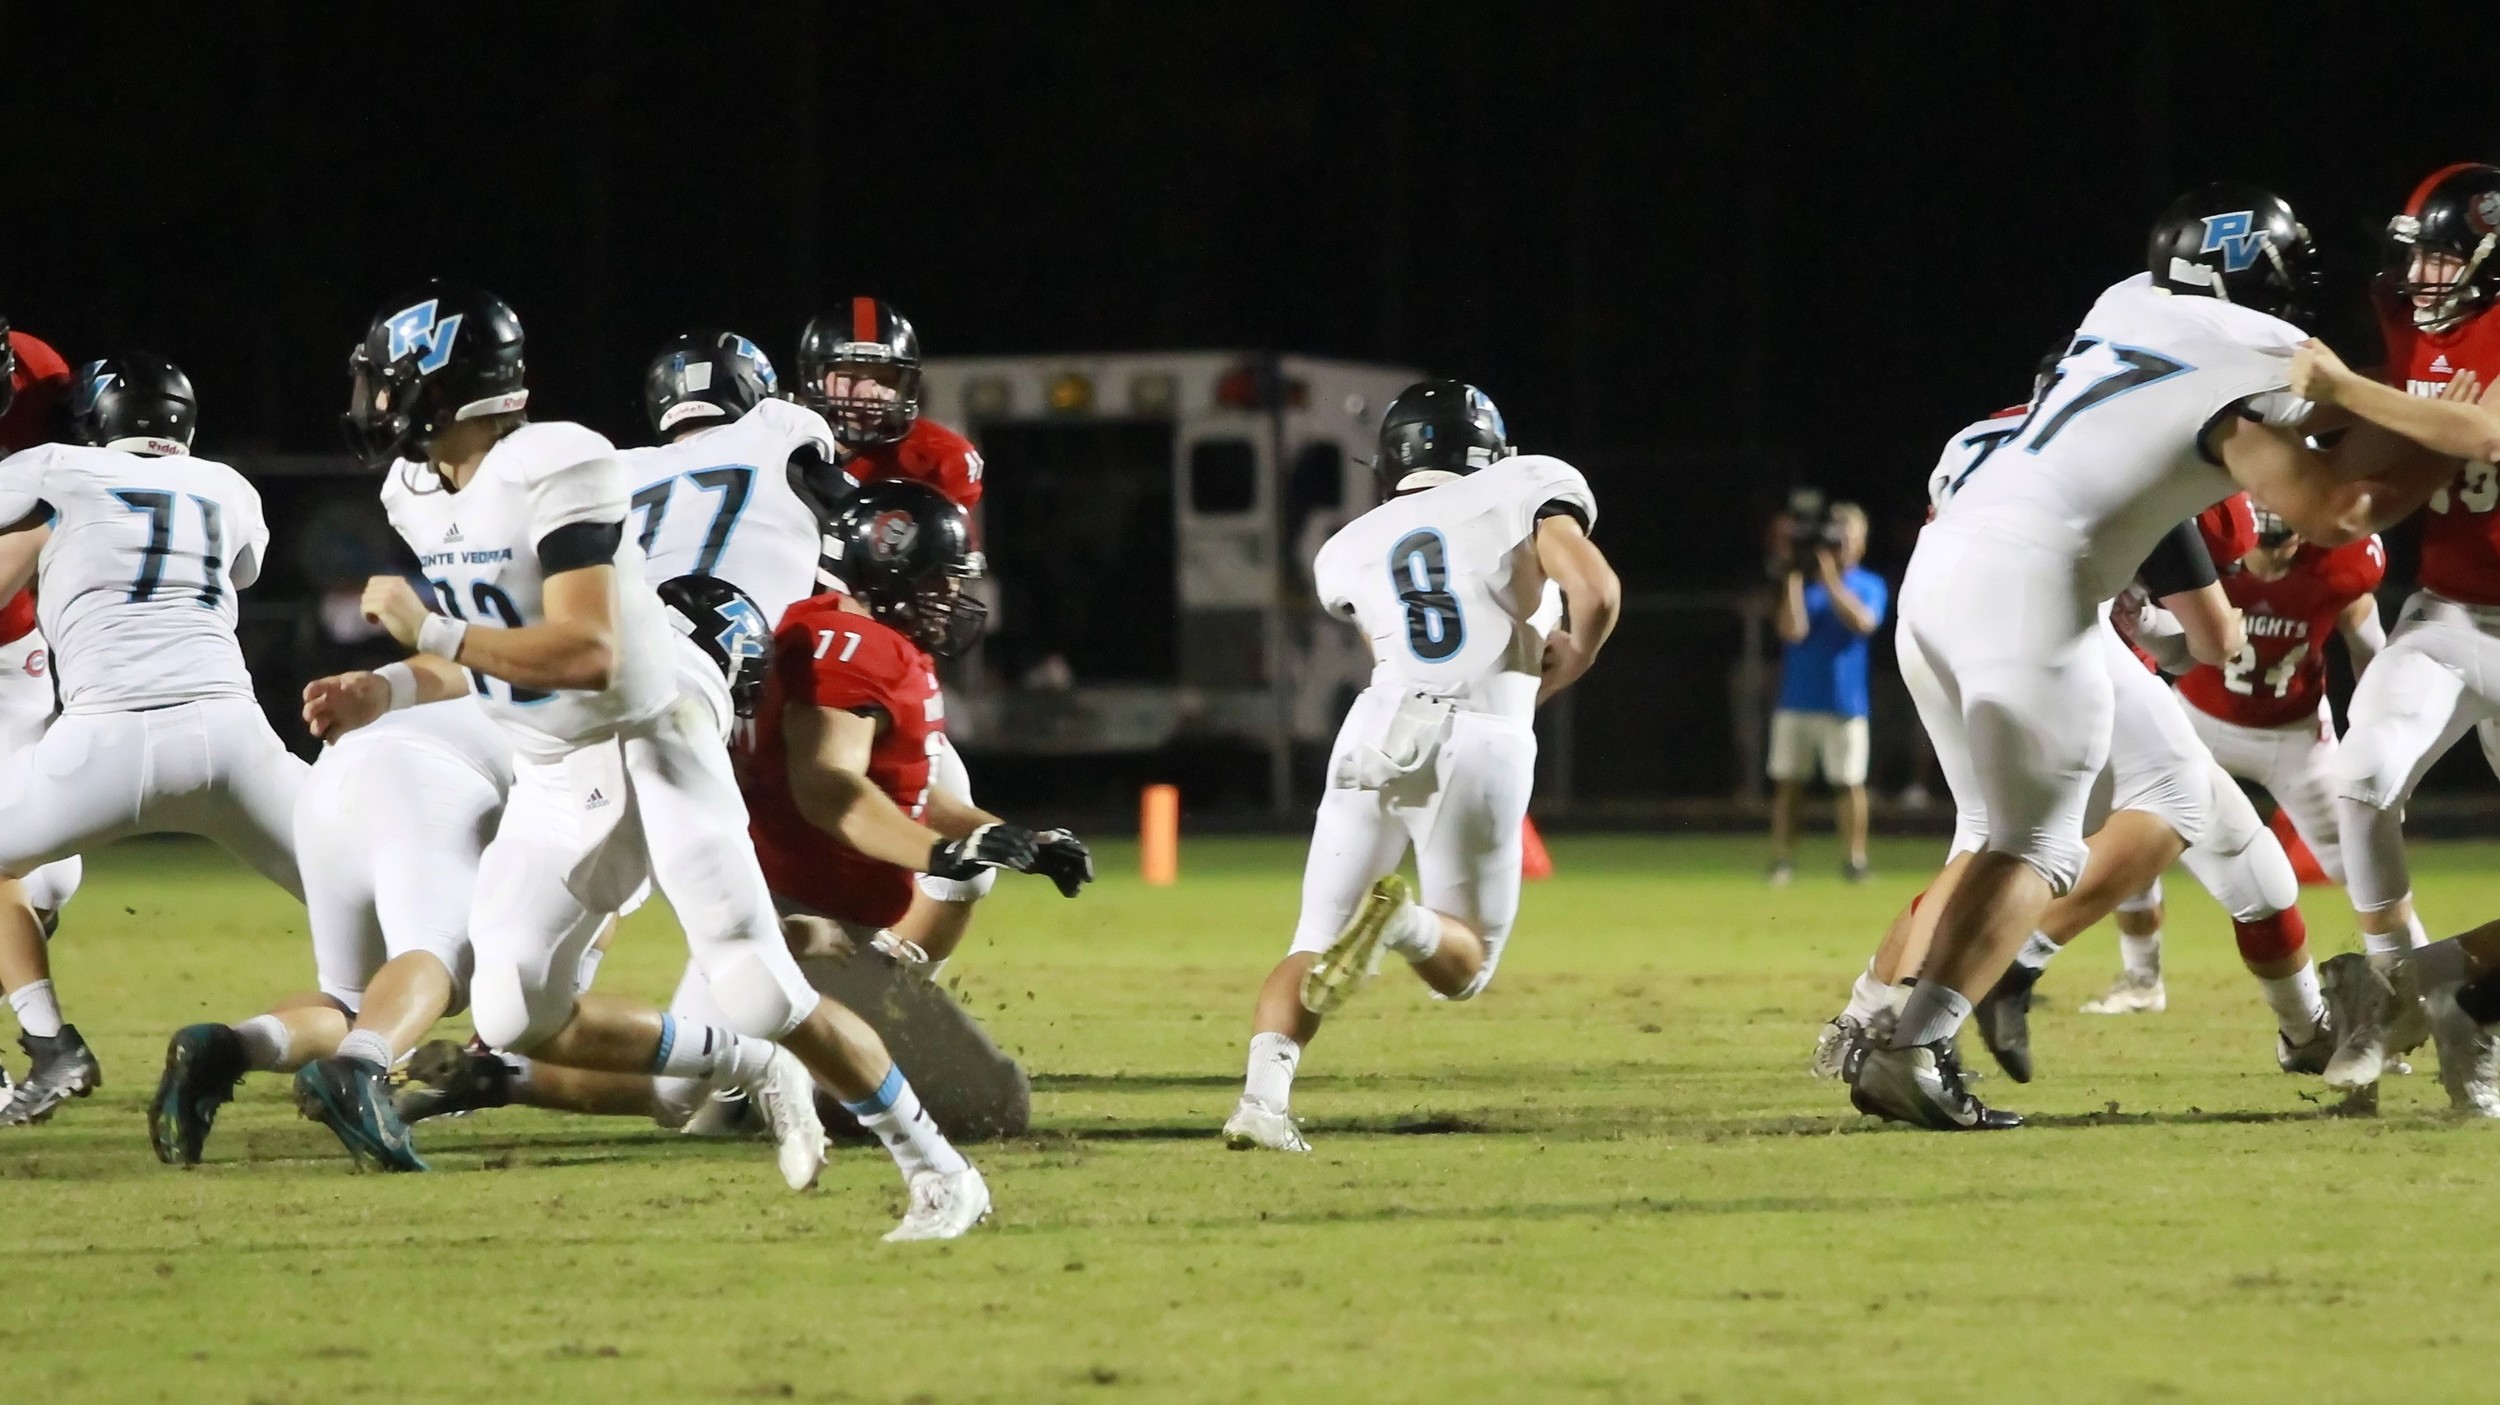 Photos by Chris Norton
#8 Hal Swan of the Sharks runs through a huge hole for good yardage against Creekside